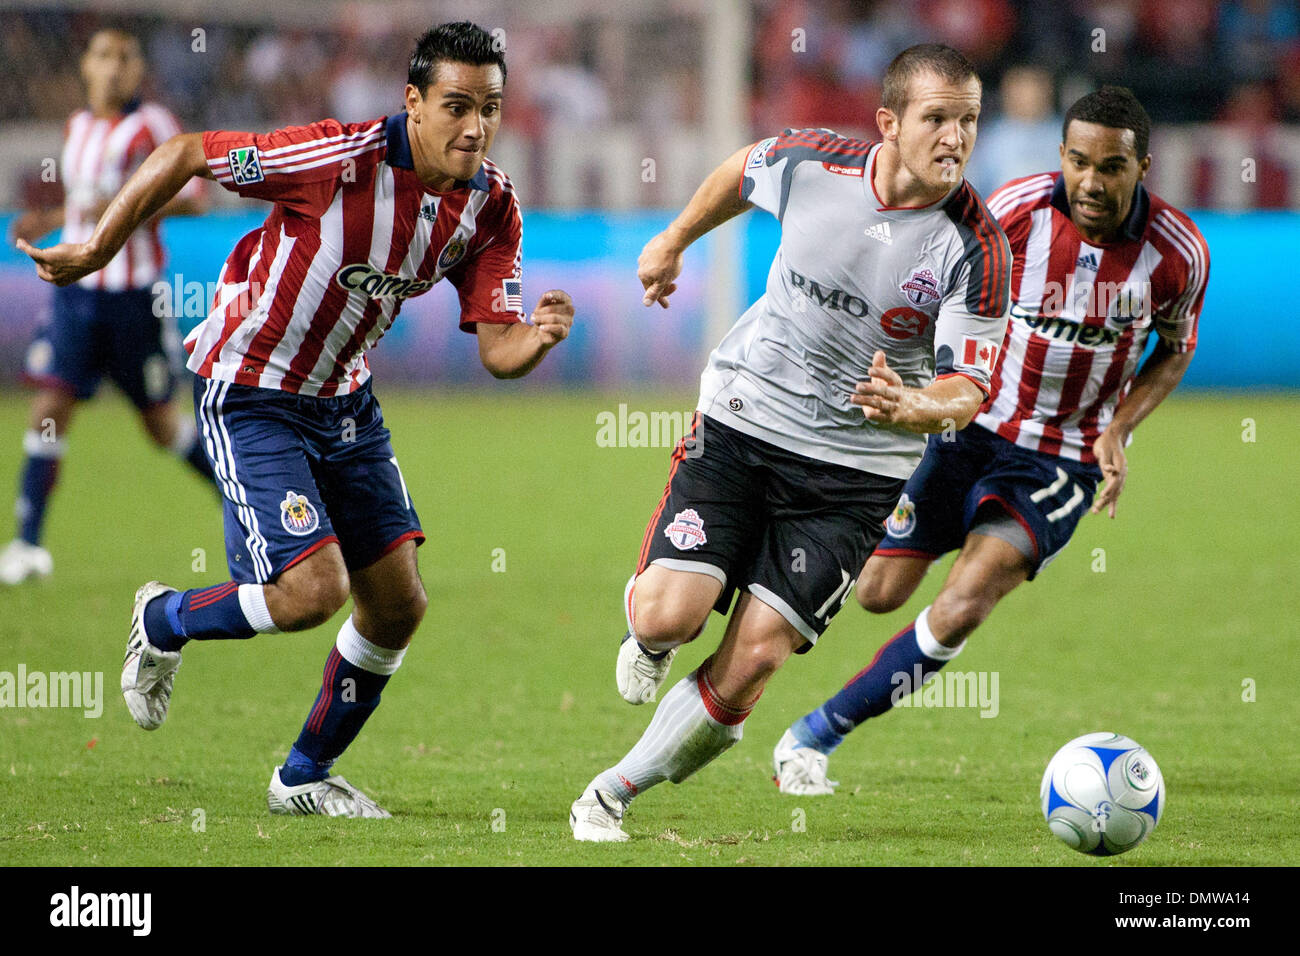 Aug. 22, 2009 - Carson, California, U.S - Chad Barrett (mid) dribbles away from Maykel Galindo (R) and Jesus Padilla (L) during the MLS game between Toronto FC and Chivas USA at the Home Depot Center. (Credit Image: © Brandon Parry/Southcreek Global/ZUMAPRESS.com) Stock Photo